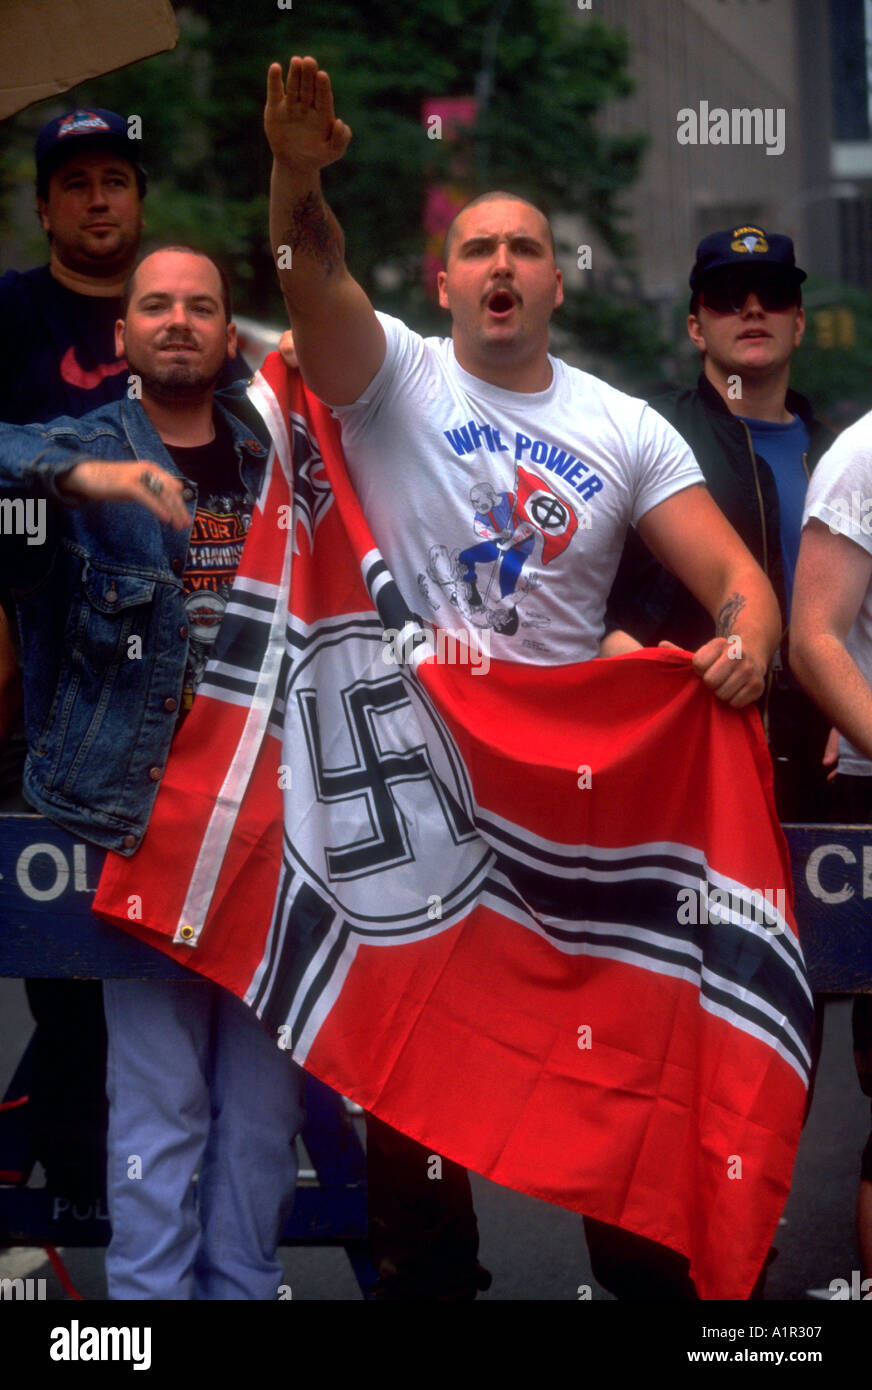 White power advocates protest at Gay Pride Parade Stock Photo